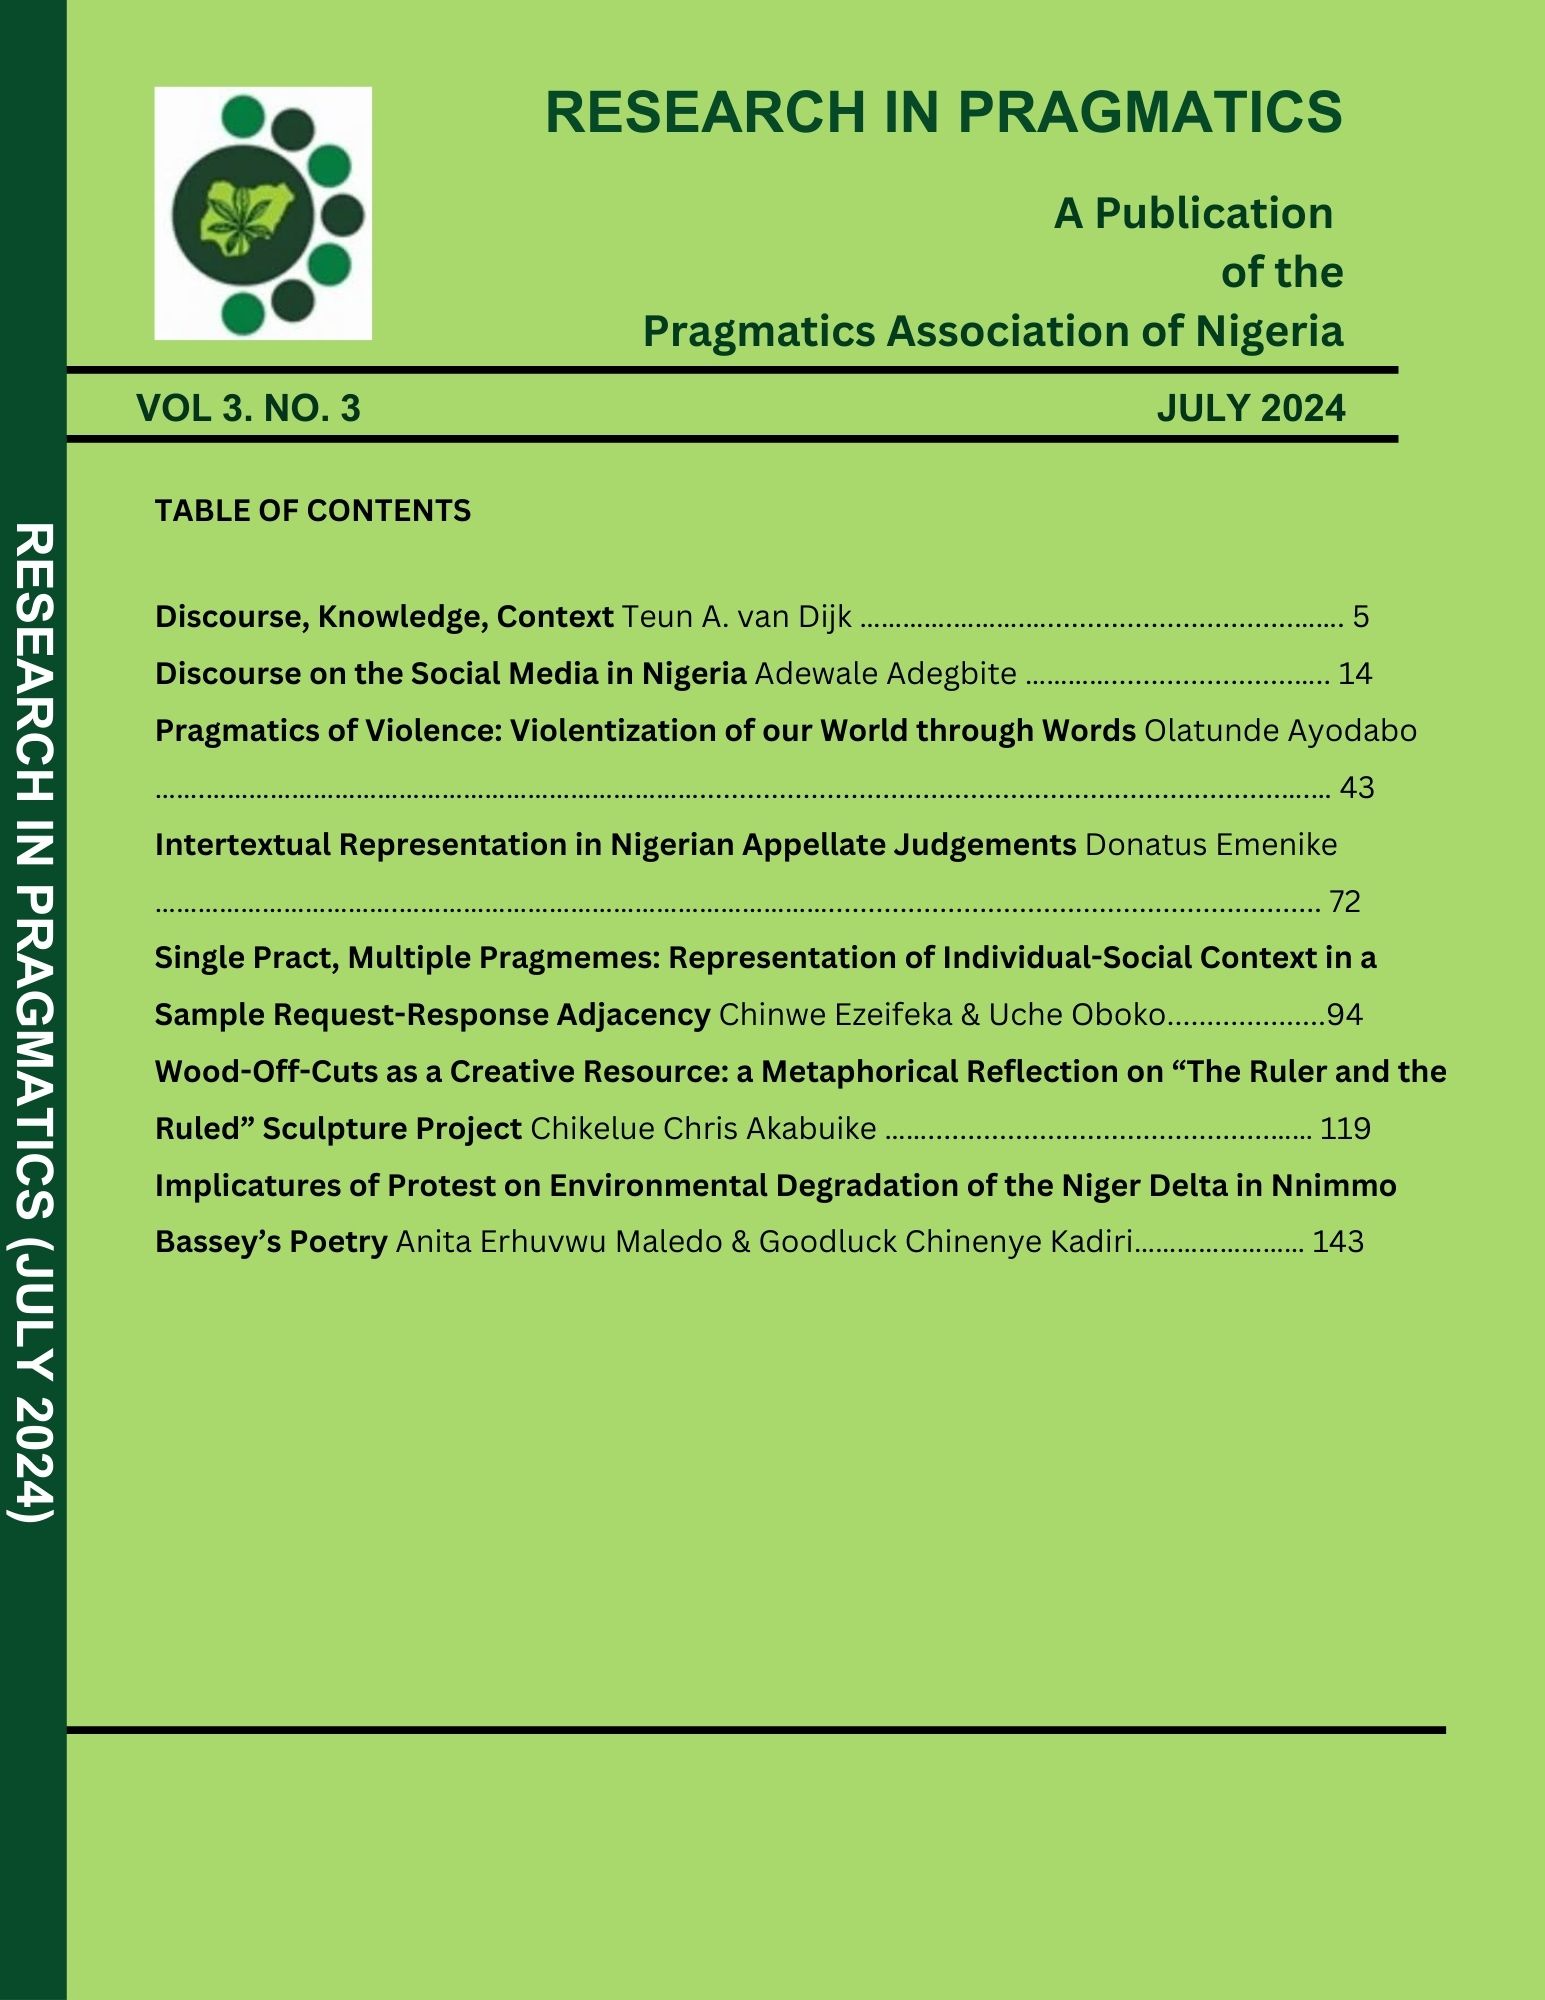 The cover page of the journal